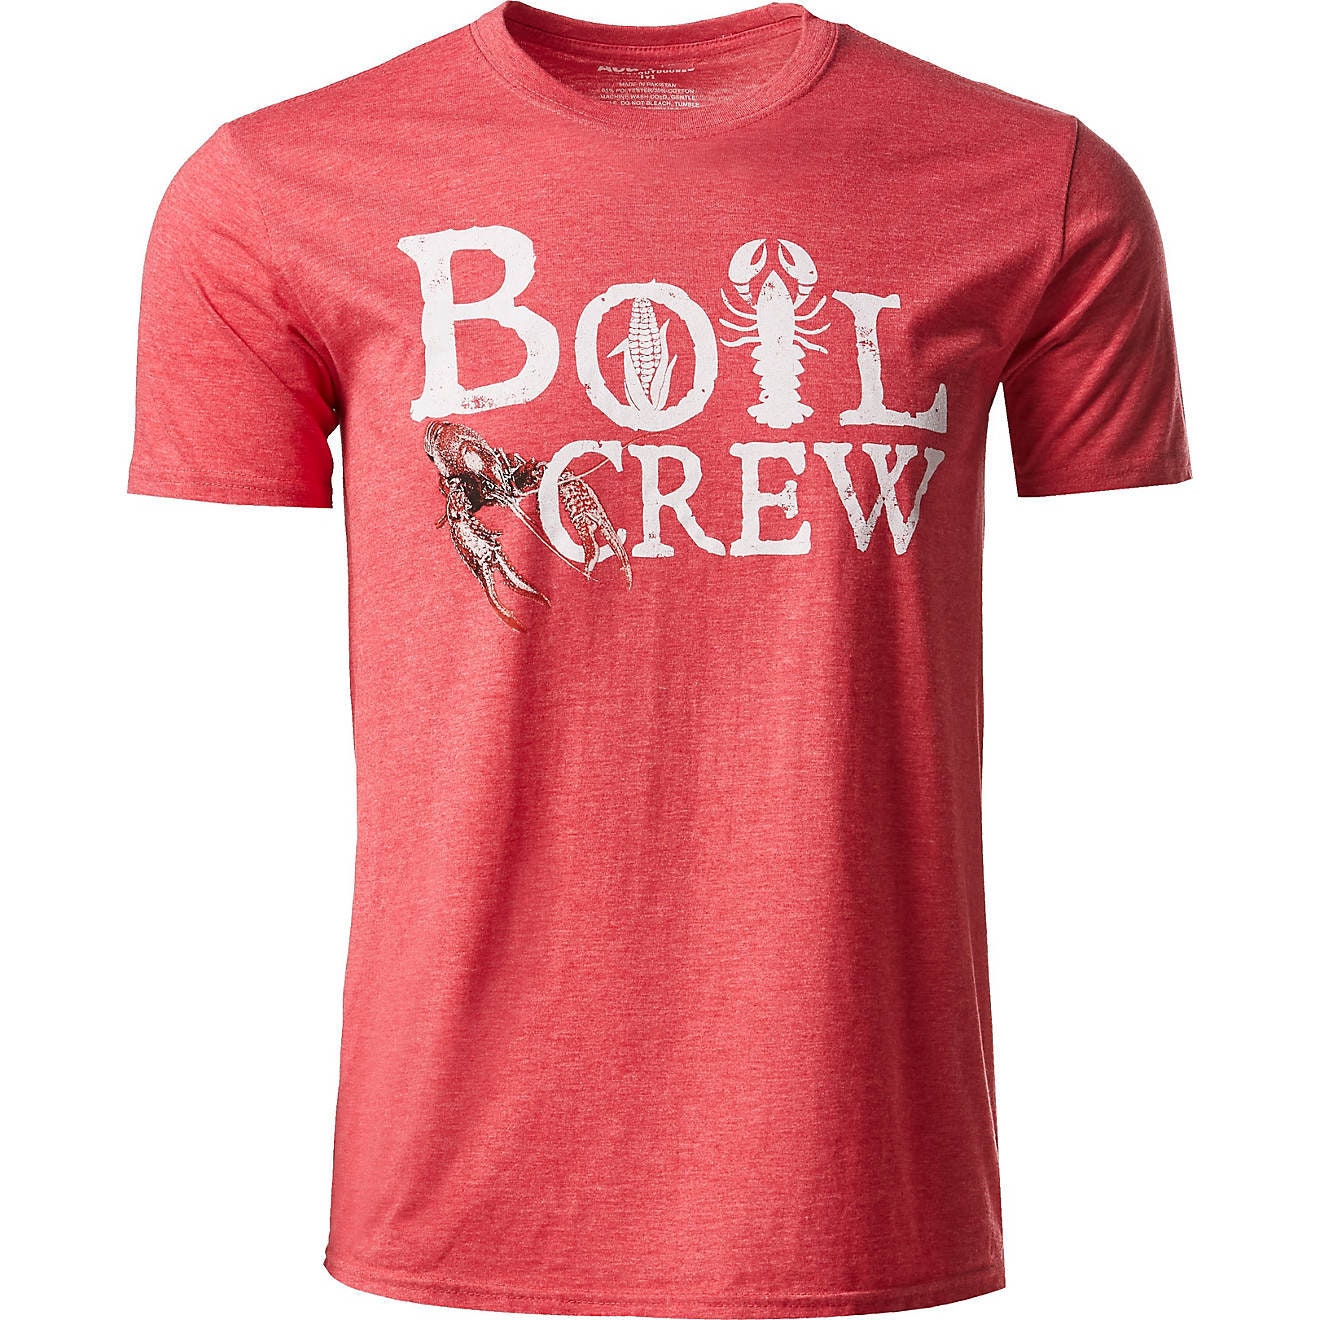 Men's Crawfish Crew Short Sleeve T-Shirt Lobster Beer Crab Seafood Boil Party Cajun Creole New Orleans